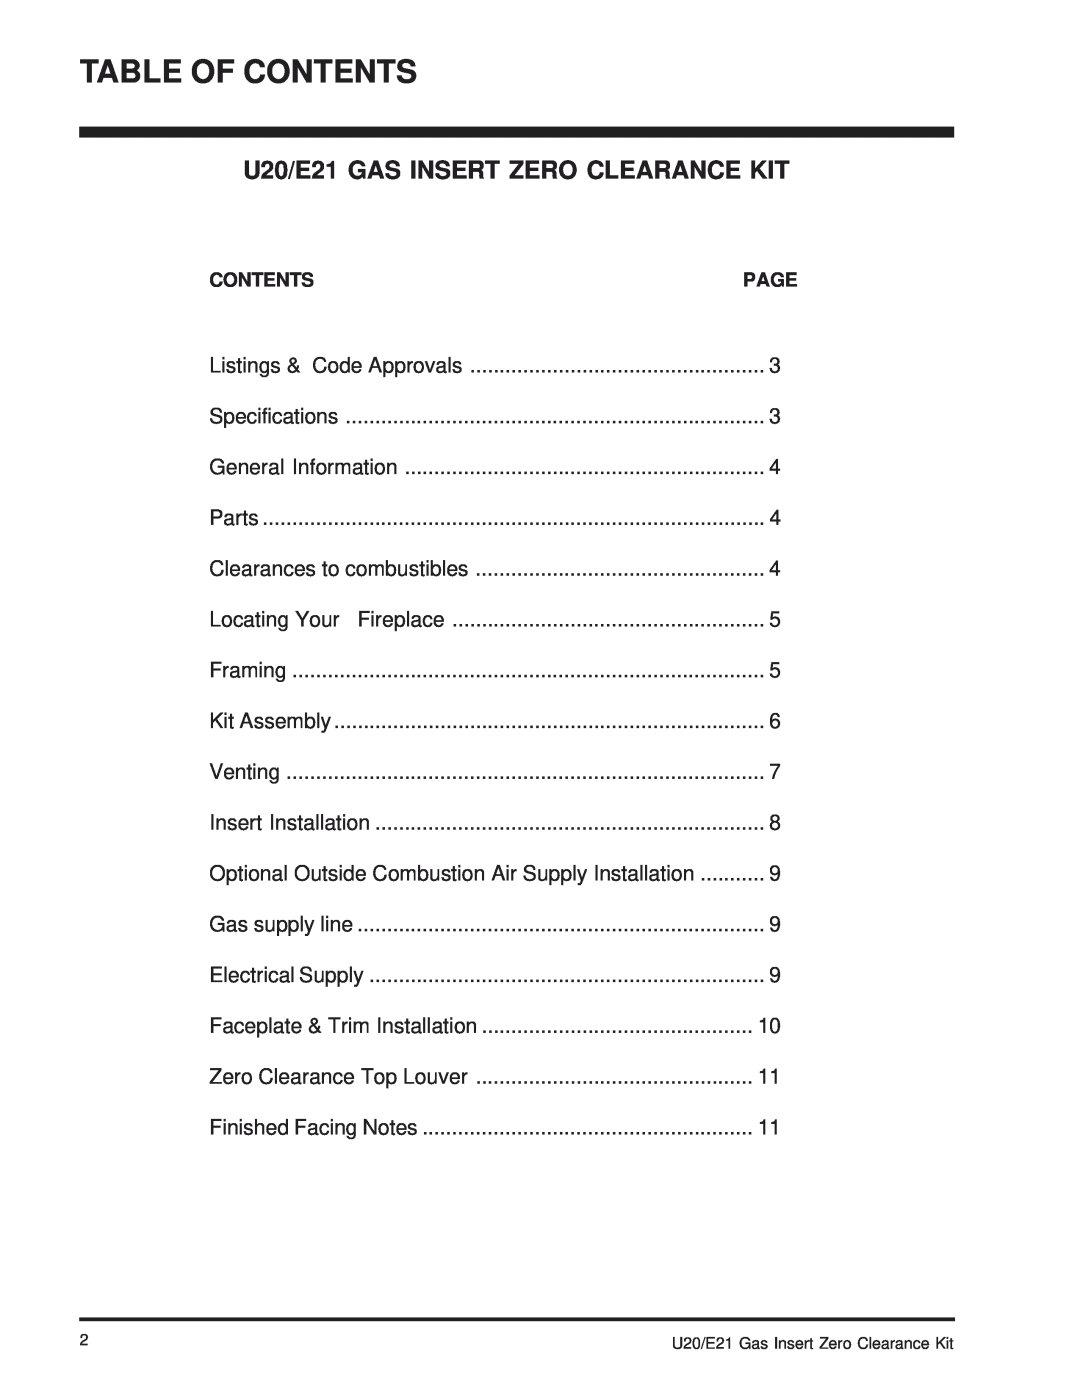 Regency installation manual Table Of Contents, U20/E21 GAS INSERT ZERO CLEARANCE KIT 